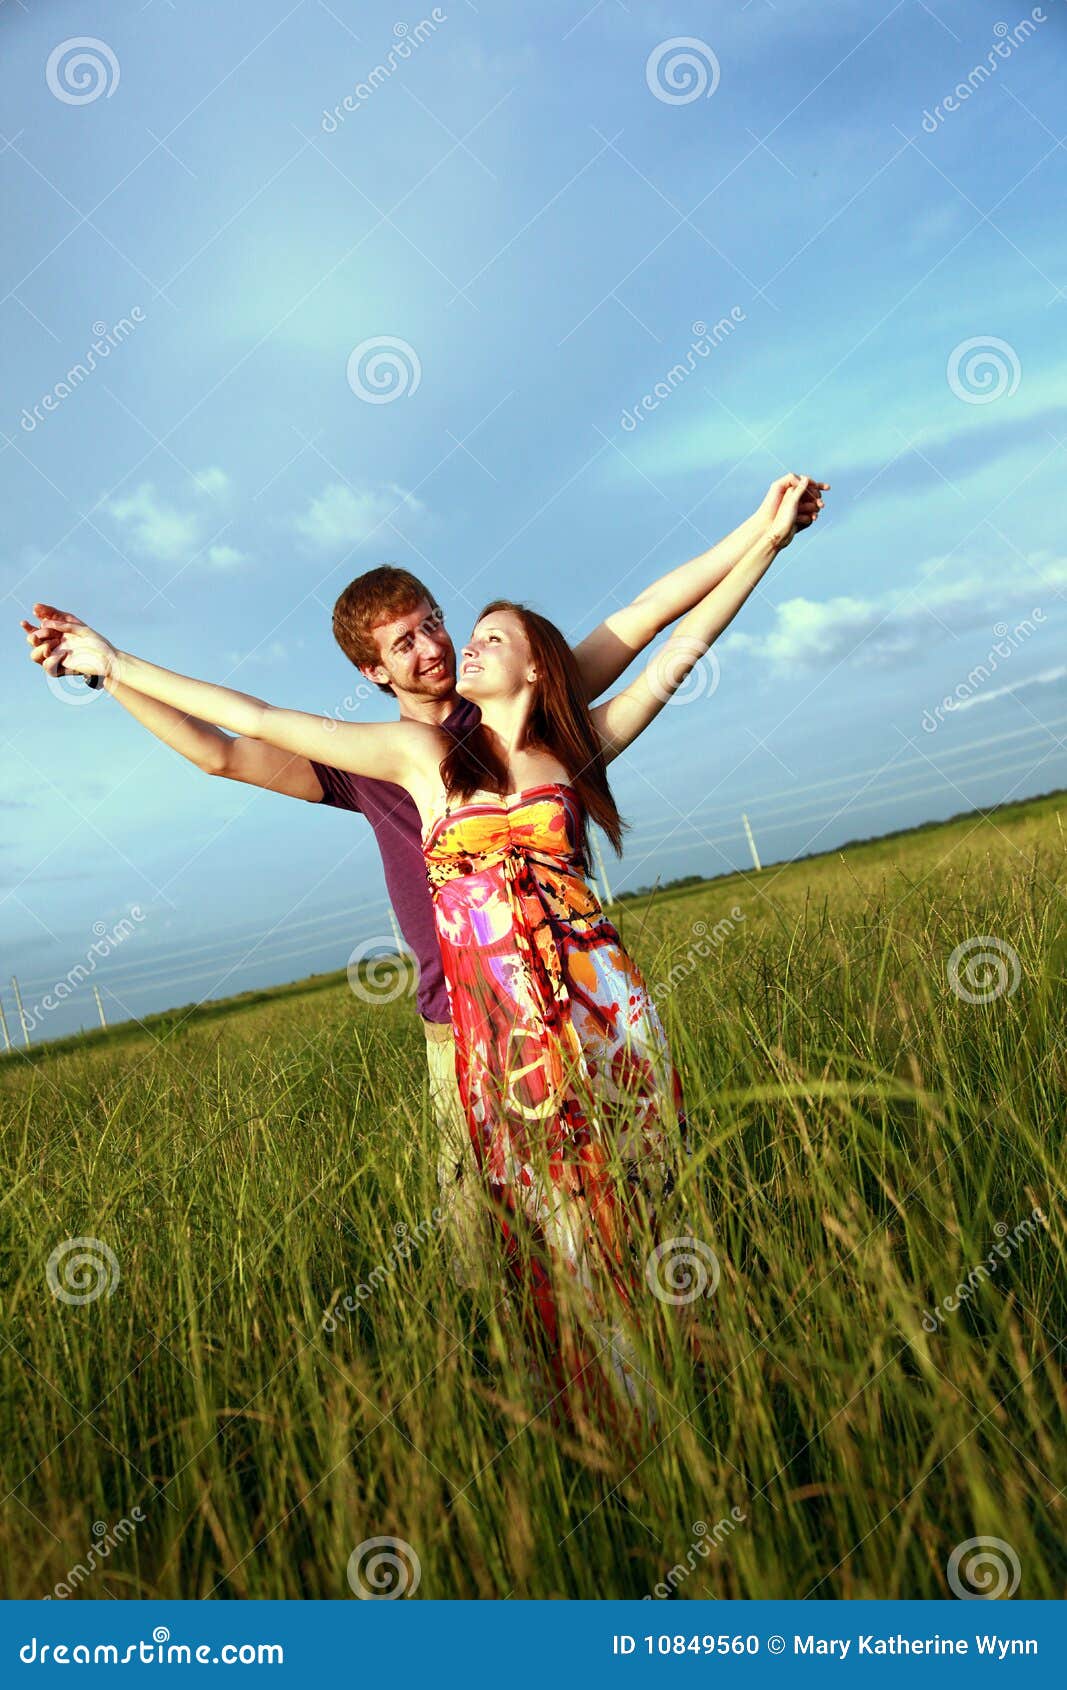 Couple in Field. A romantic young couple posing in a field with their hands stretched out.